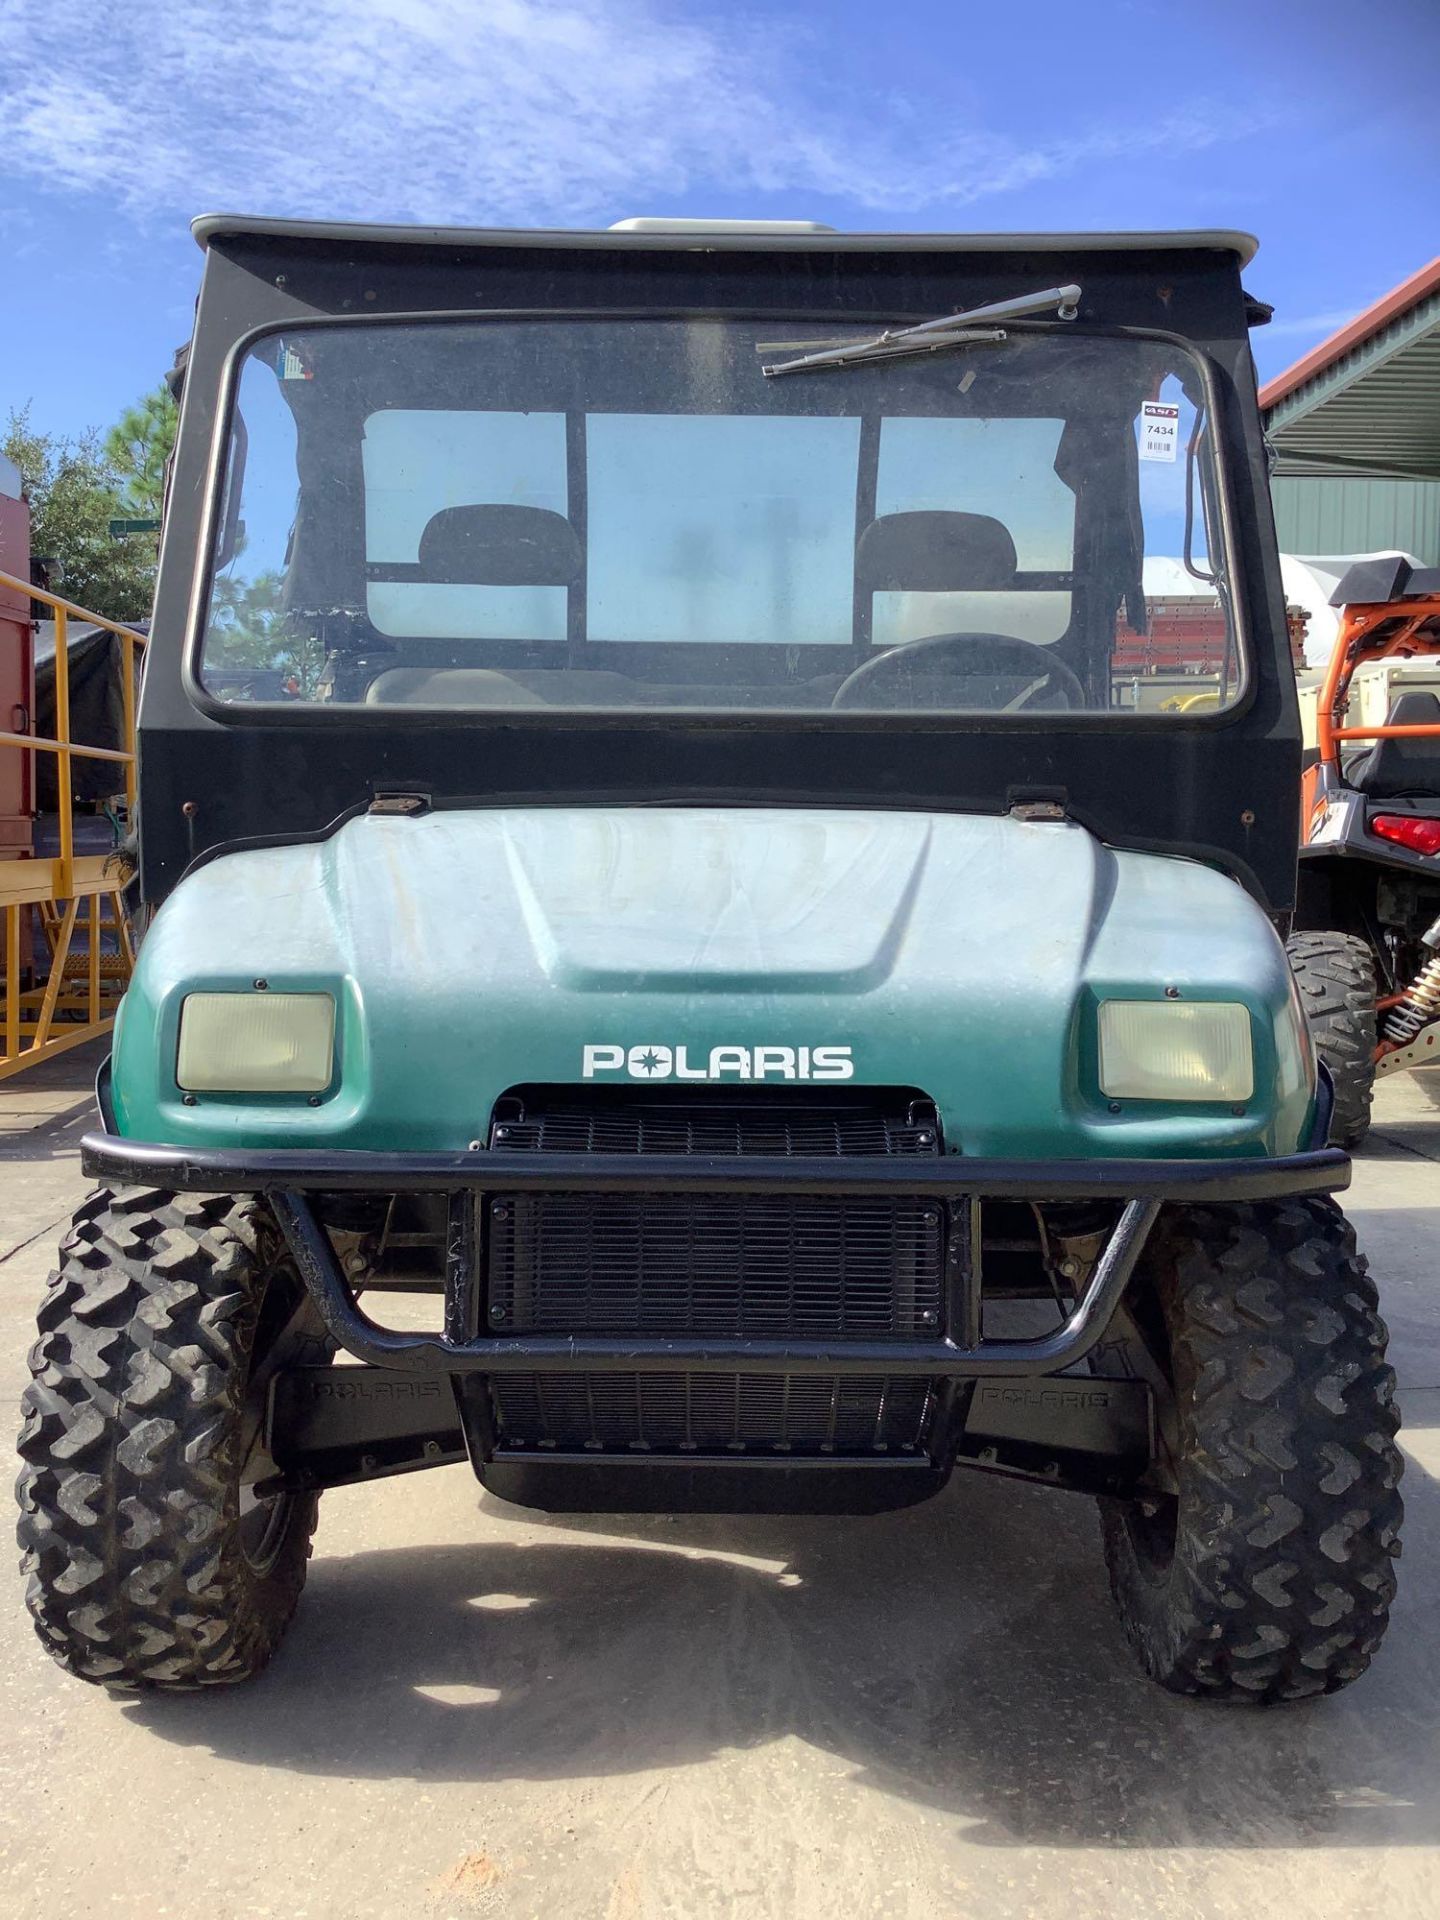 POLARIS RANGER 4x4, GAS POWERED, AWD, HITCH ON BACK, MANUAL DUMP BED, WINDSHIELD WIPER, RUNS AND OPE - Image 9 of 14